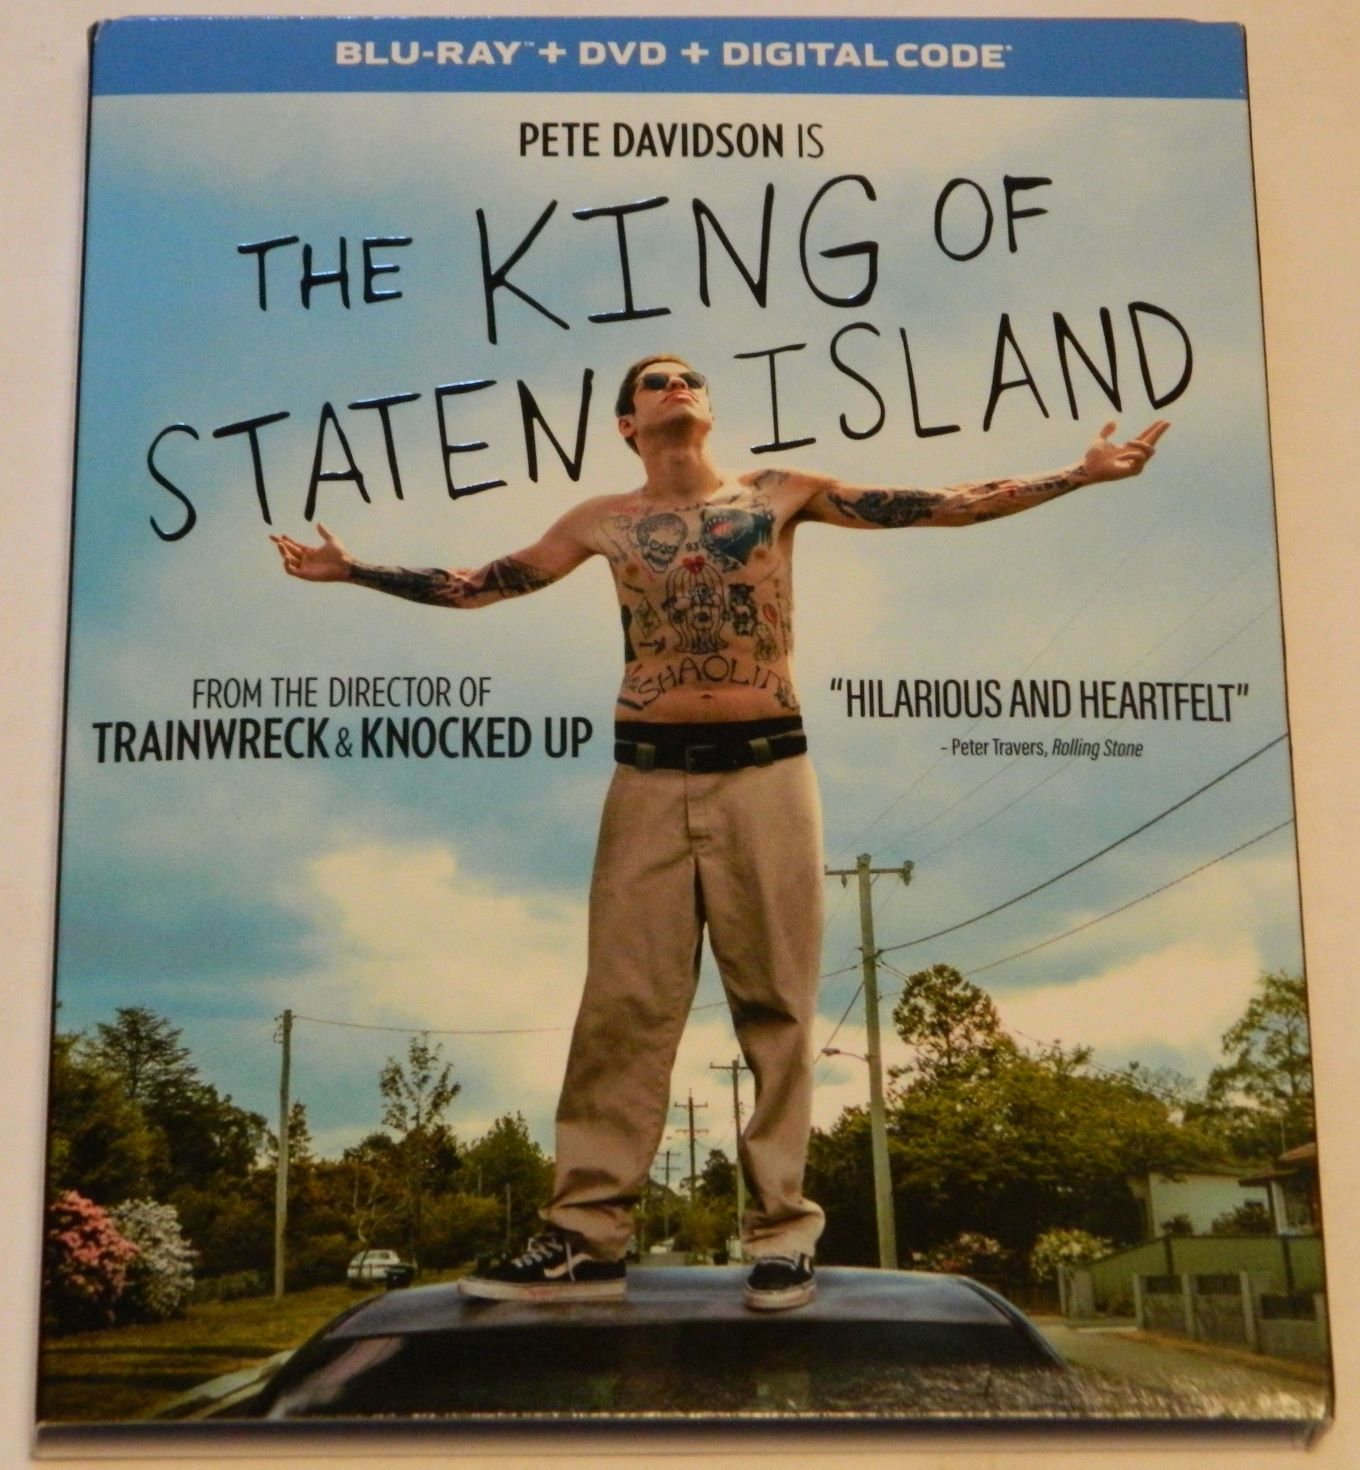 The King of Staten Island Blu-Ray Review